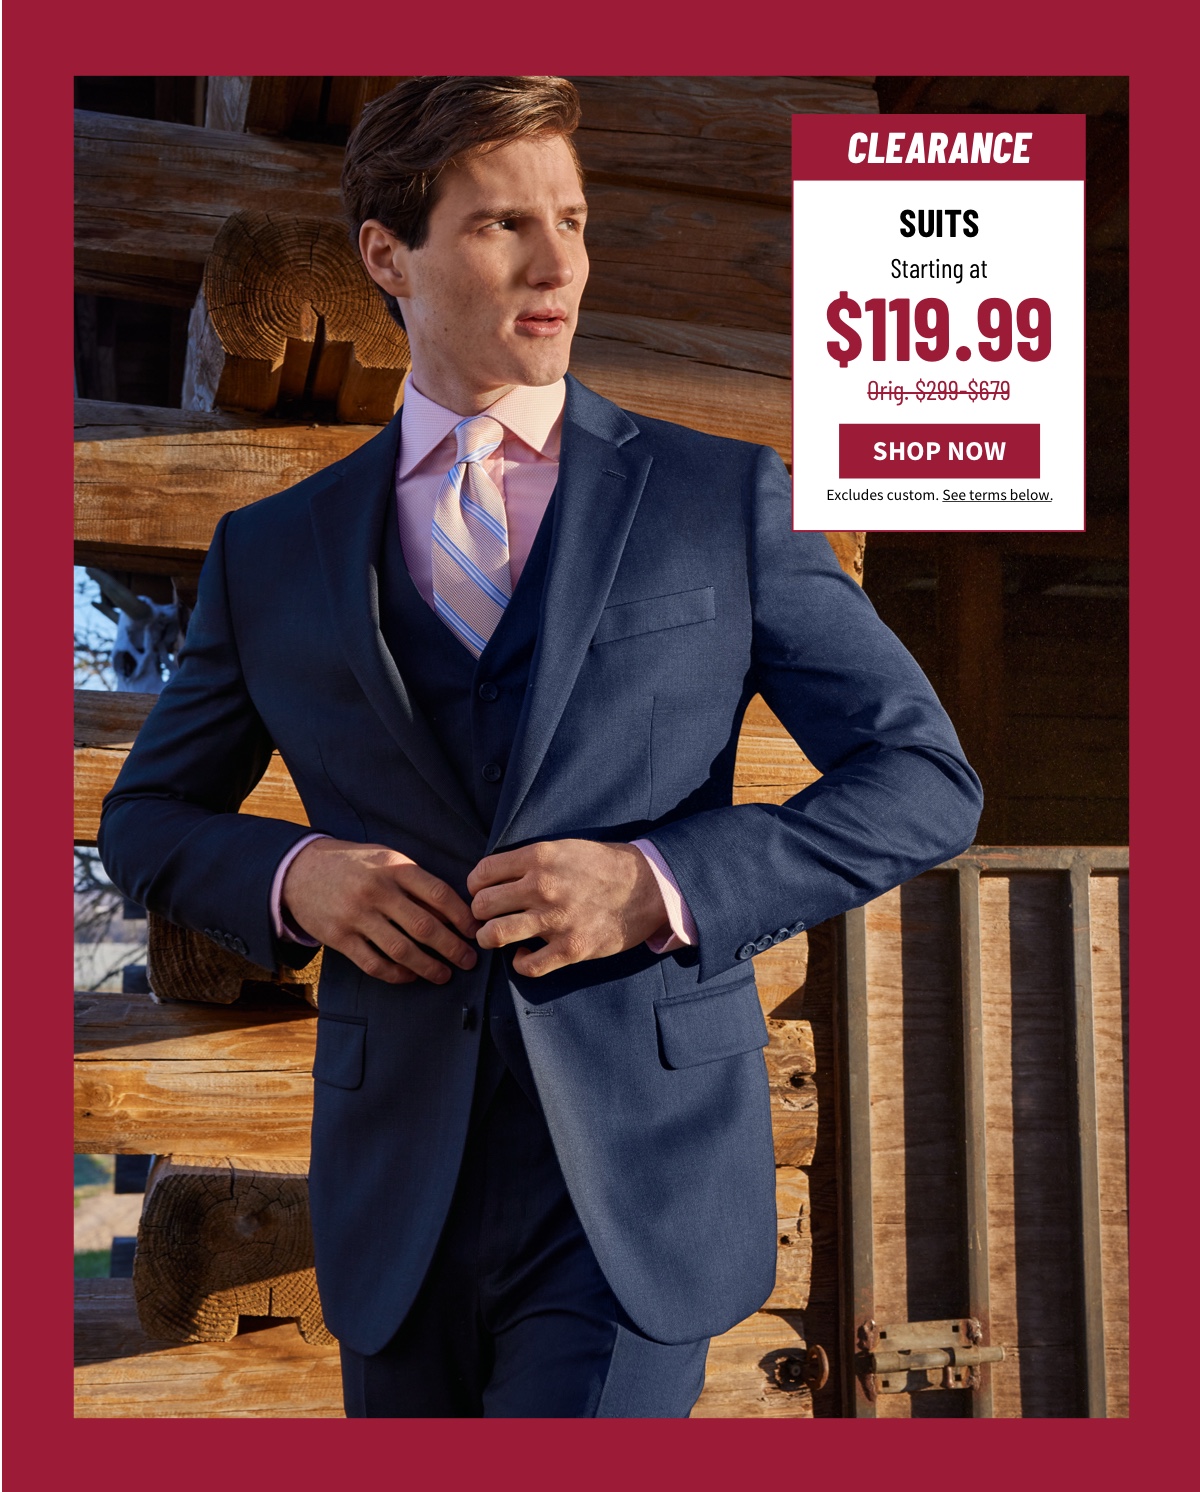 Clearance Suits Starting at $119.99 Orig. $299-$679 Shop Now See terms below.